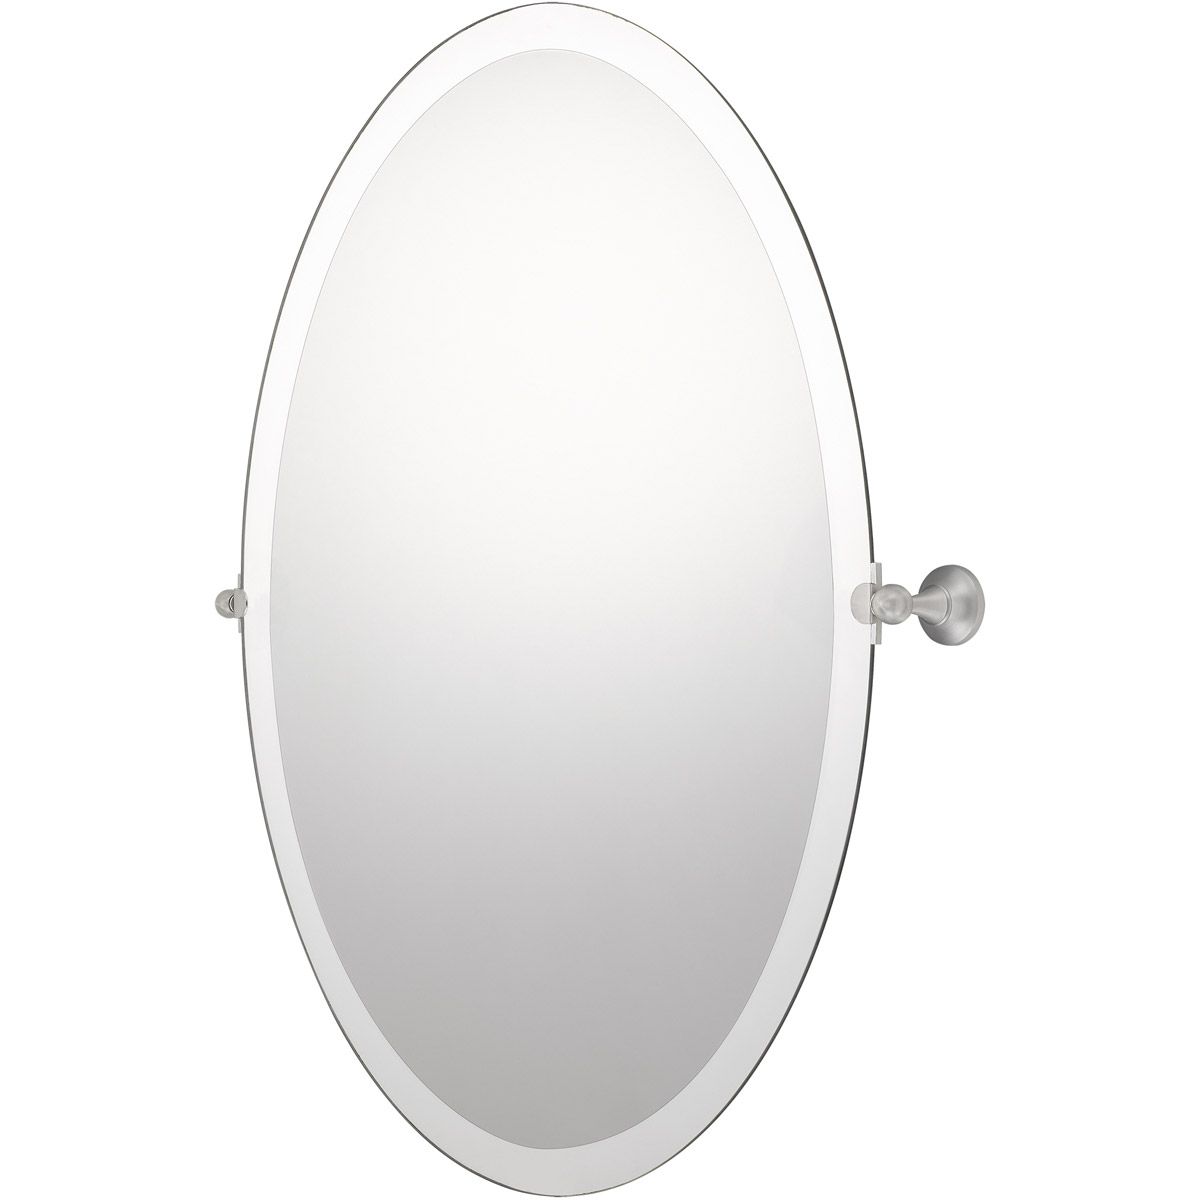 Quoizel Qr5137 Impression 28 X 26 Inch Brushed Nickel Wall Mirror | Ebay Within Brushed Nickel Wall Mirrors (View 9 of 15)